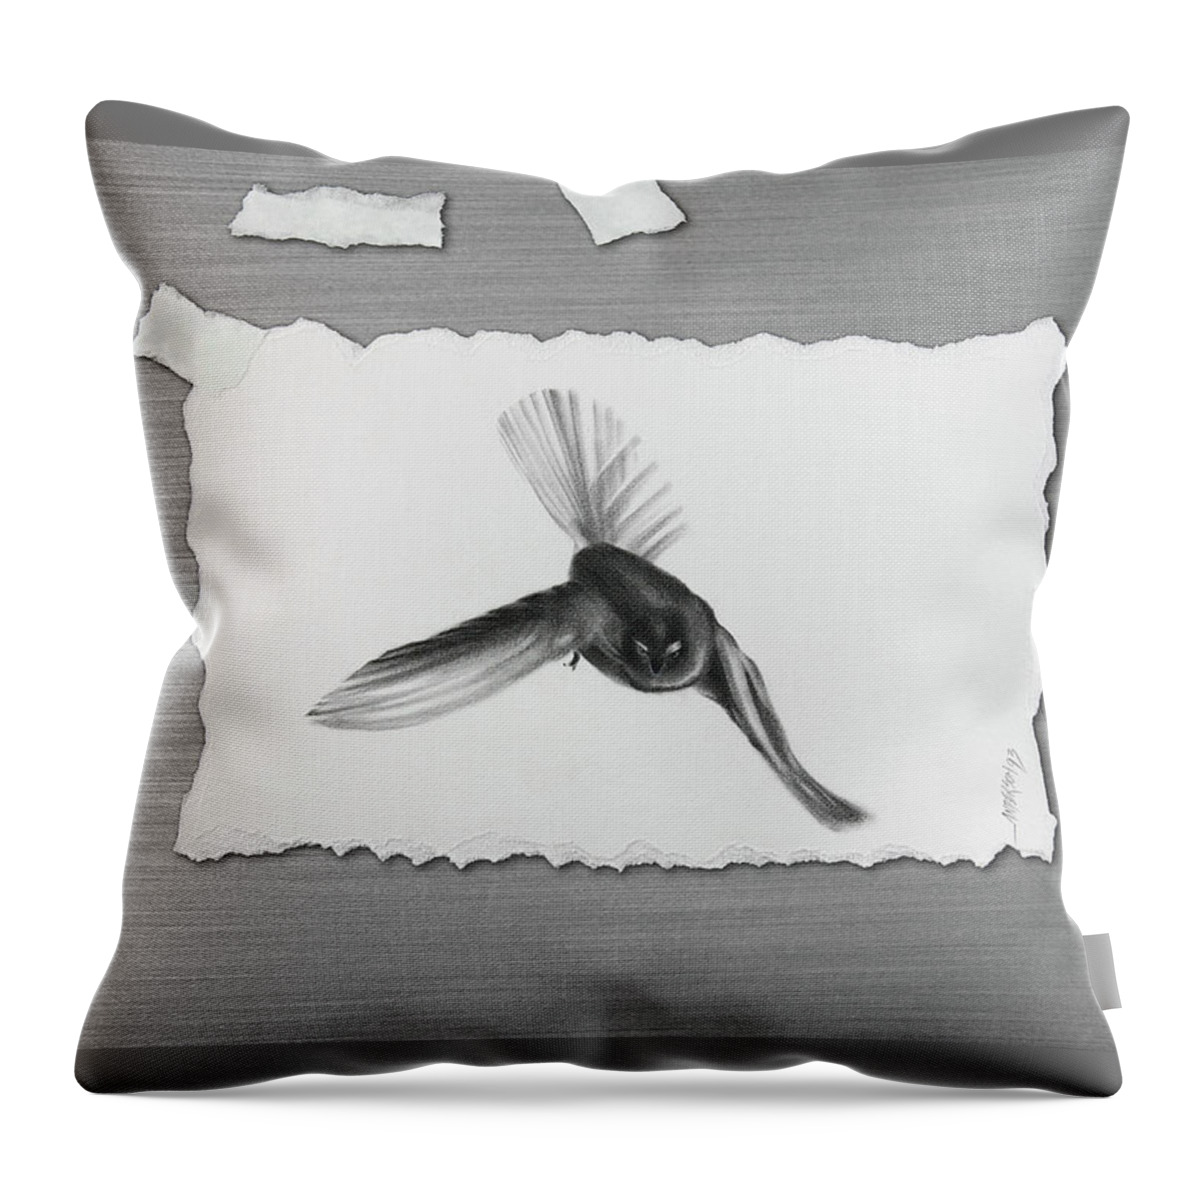 Interior Decoration Throw Pillow featuring the drawing The Search For Food by Ian Anderson